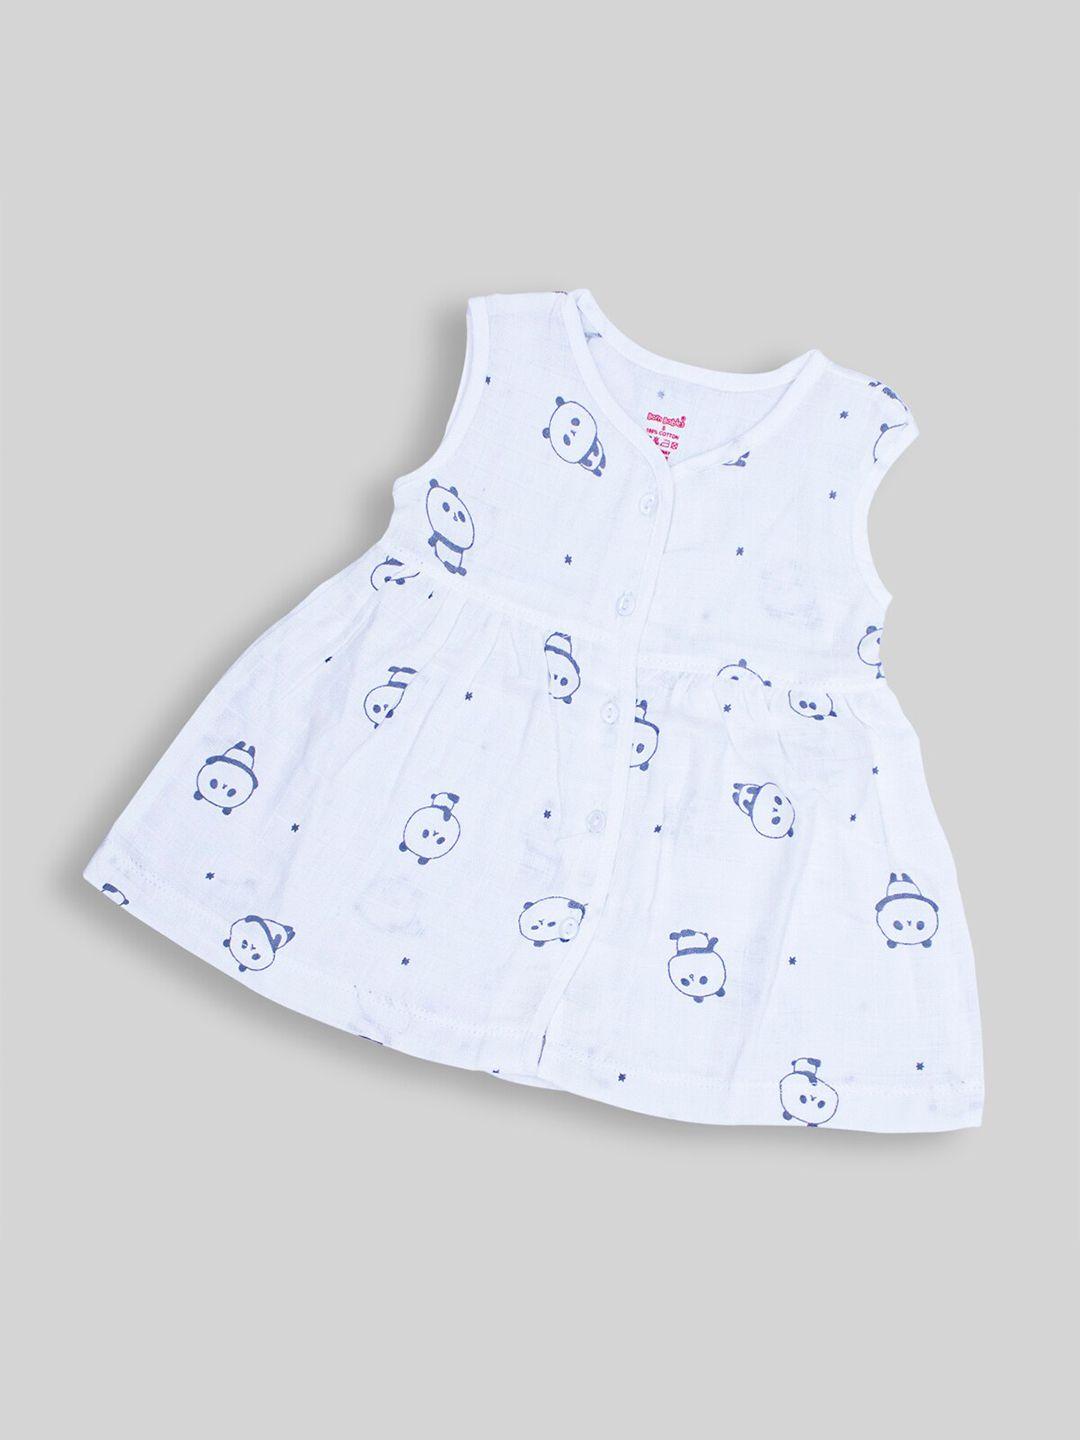 Born Babies Girl Graphic Printed Cotton Fit & Flare Dress